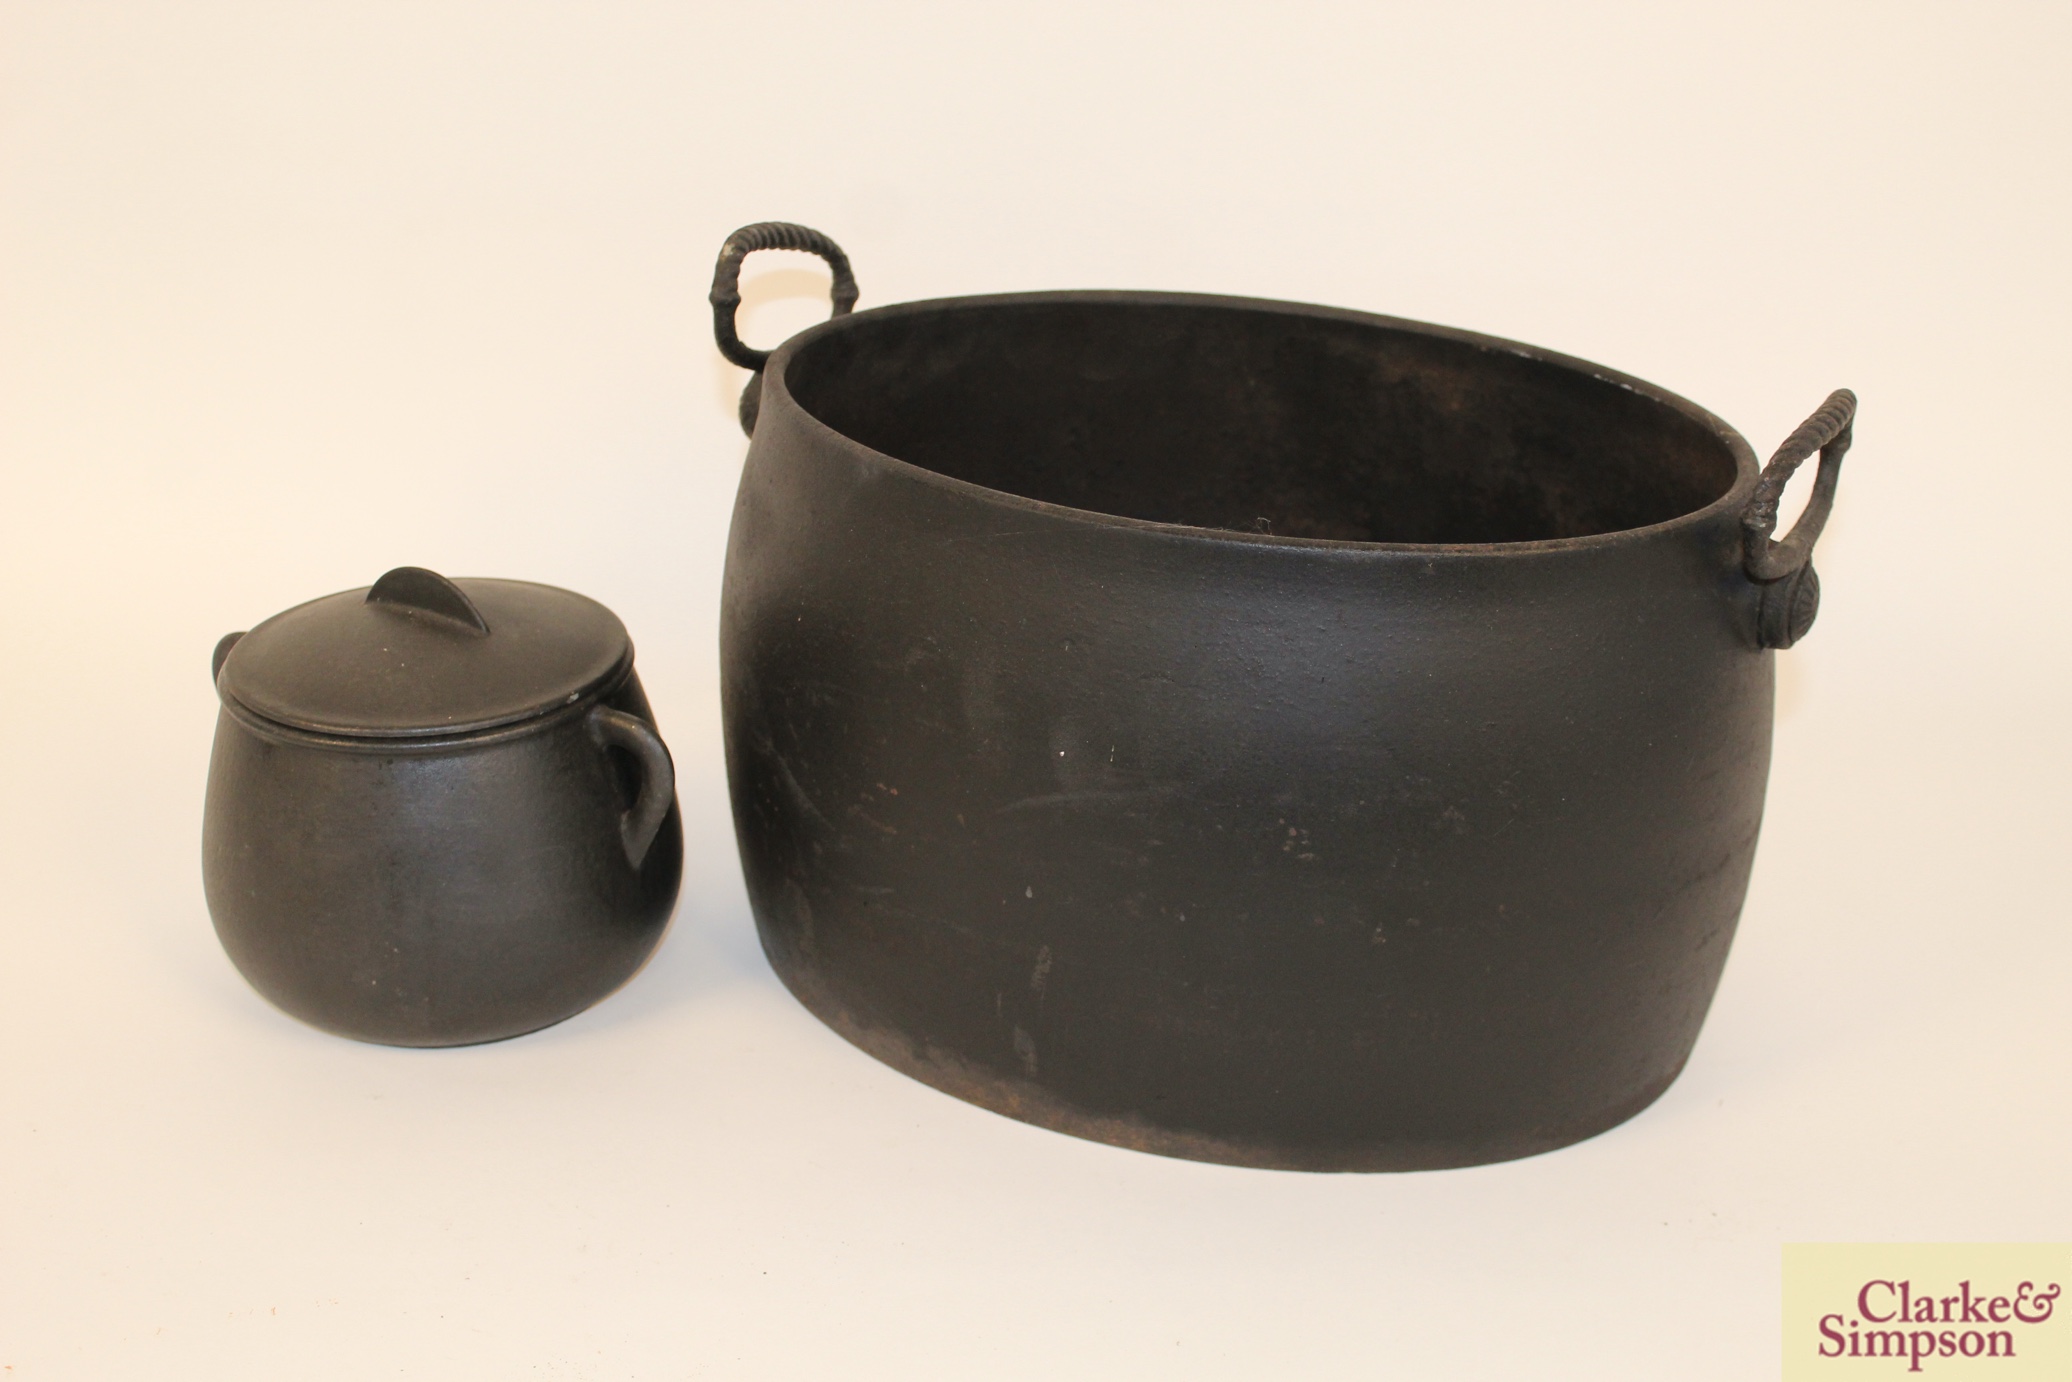 An oval cast iron cauldron / cooking pot by Pugh & - Image 2 of 8